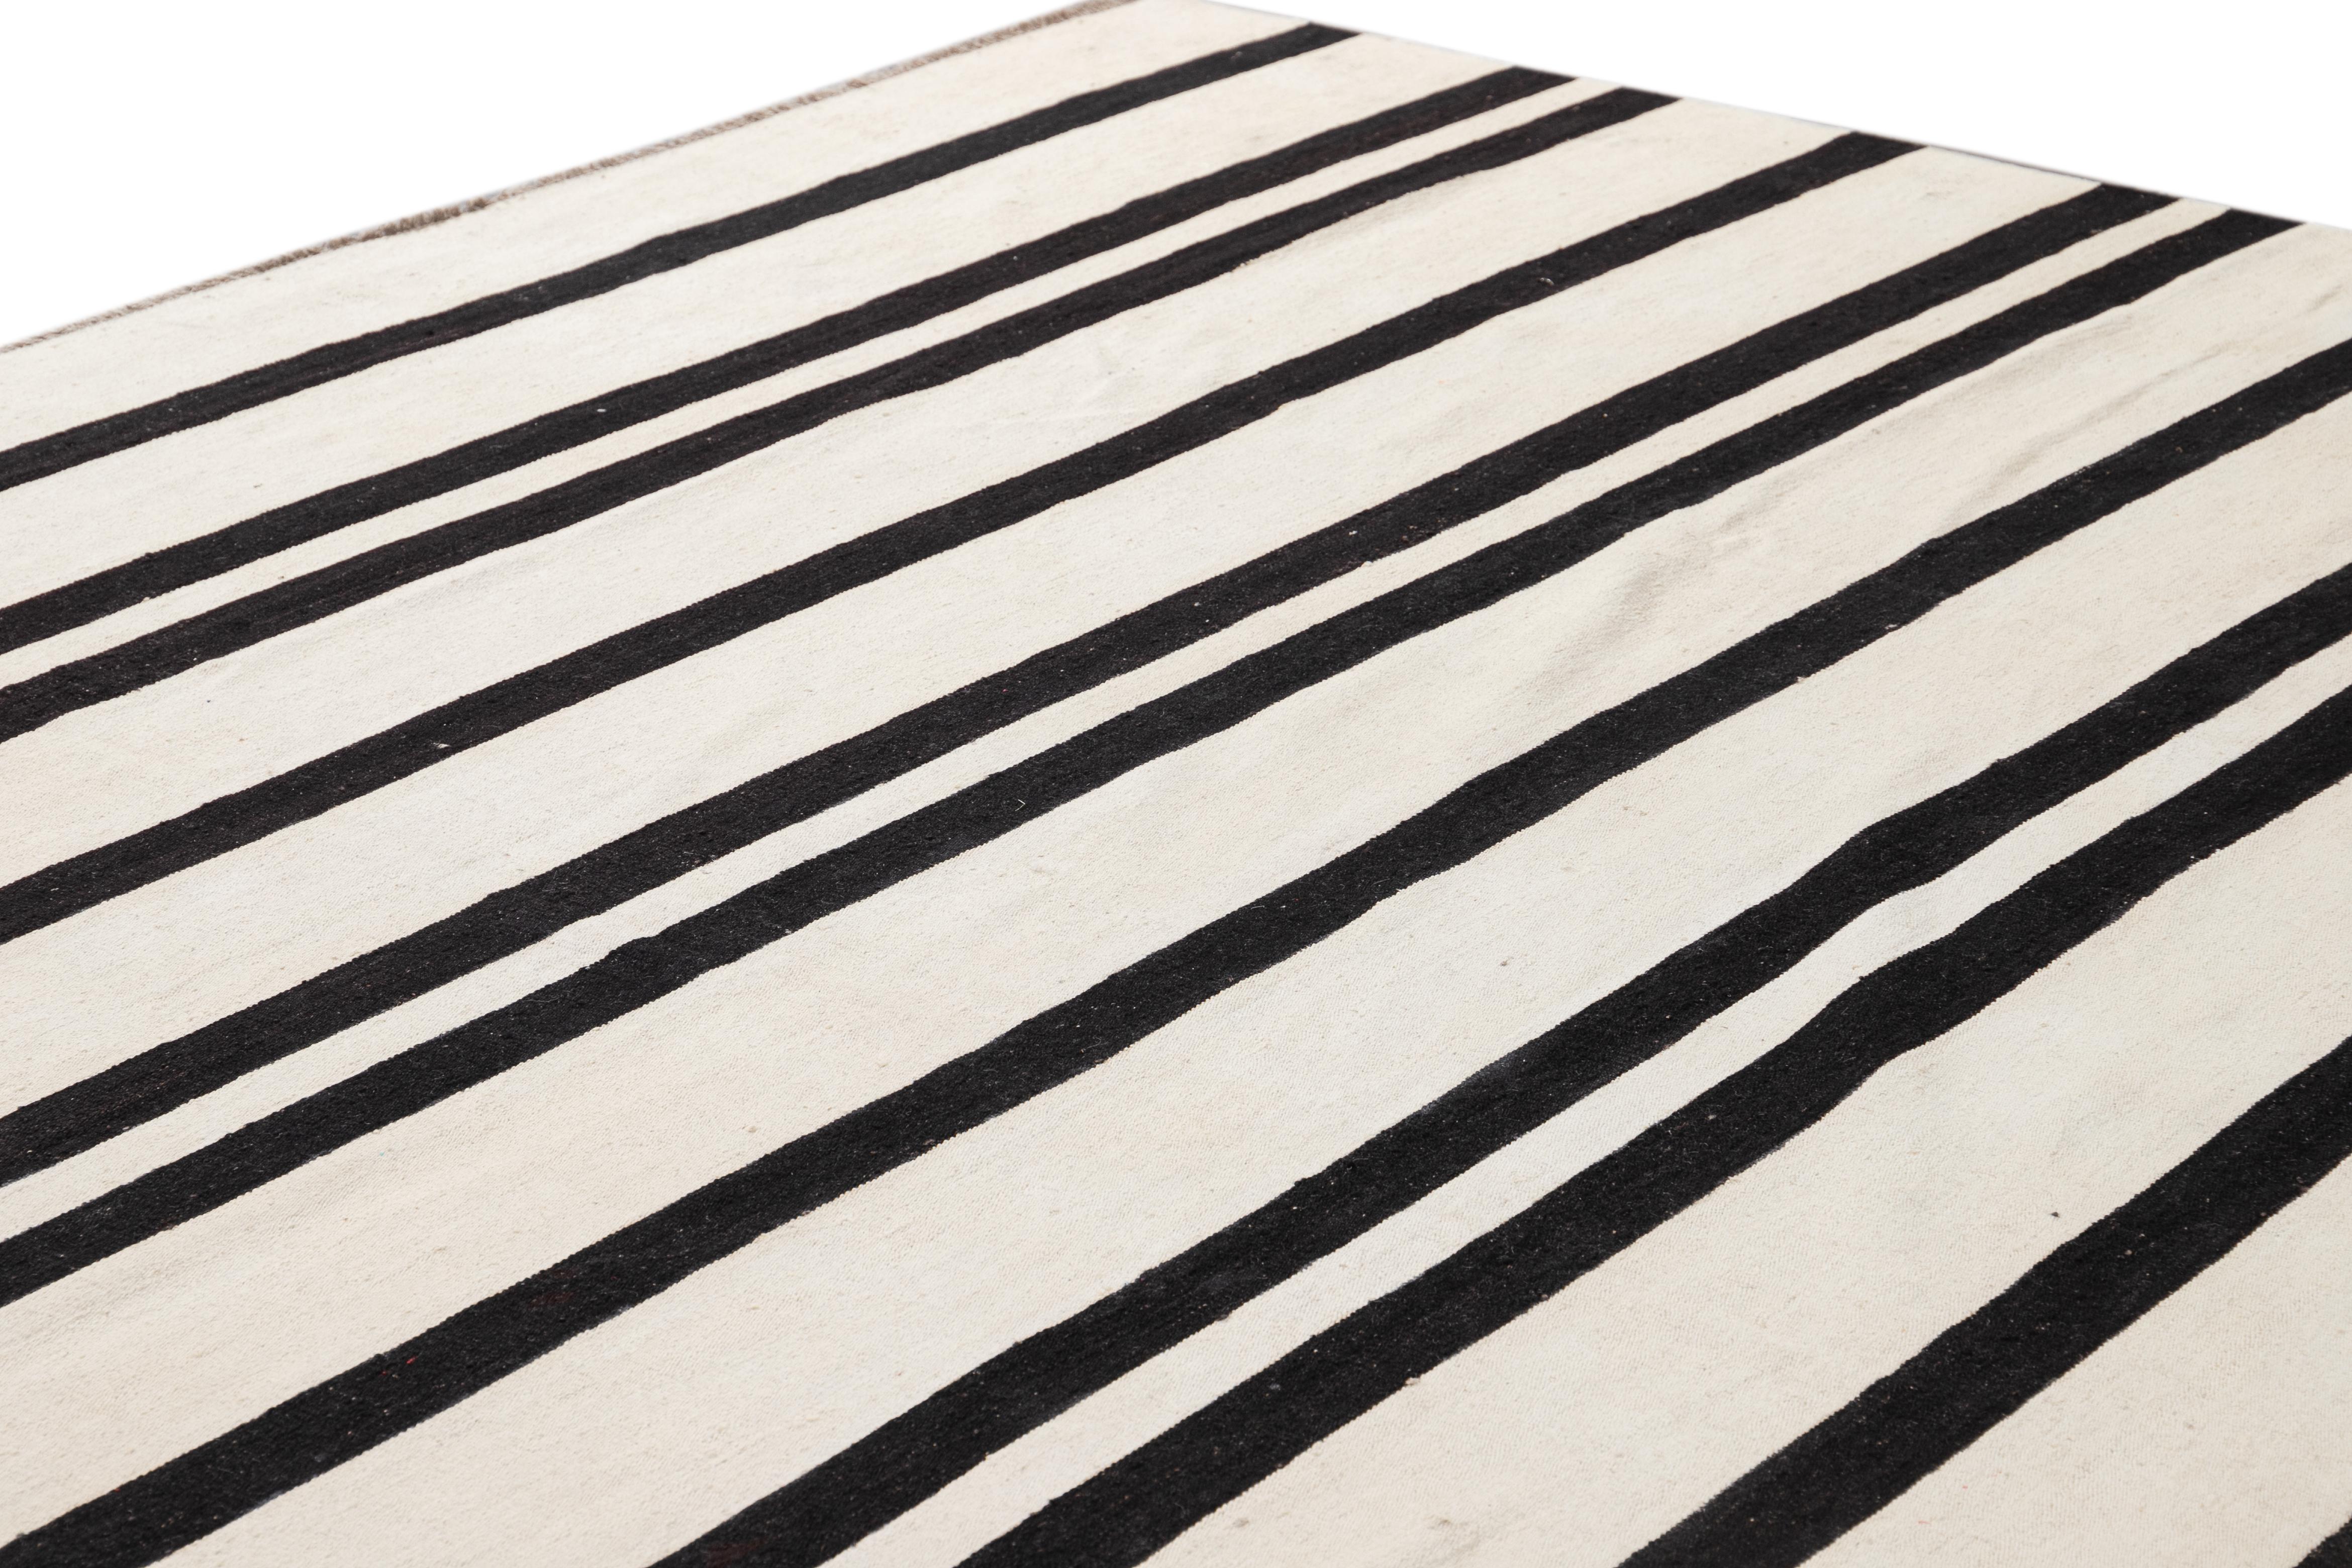 An oversized flatweave rug with a modern black and white stripe design. Made from quality wool for a long-lasting addition to any space.

This rug measures 14' 3